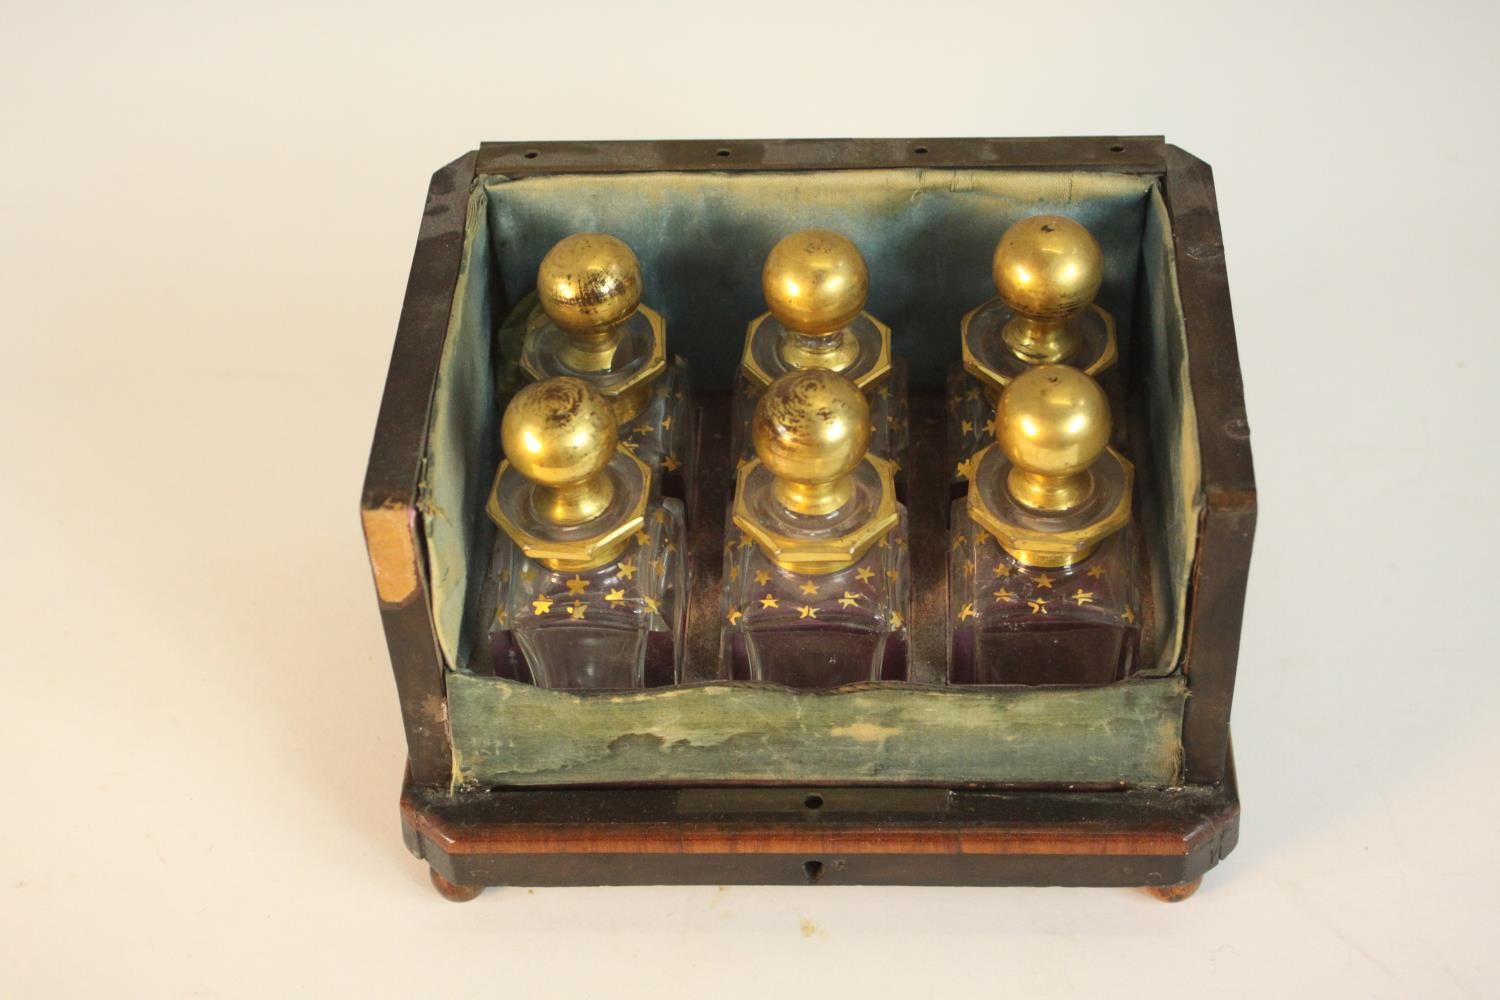 A 19th century six bottle perfume box, inlaid with burr wood panels, missing the front and lid, with